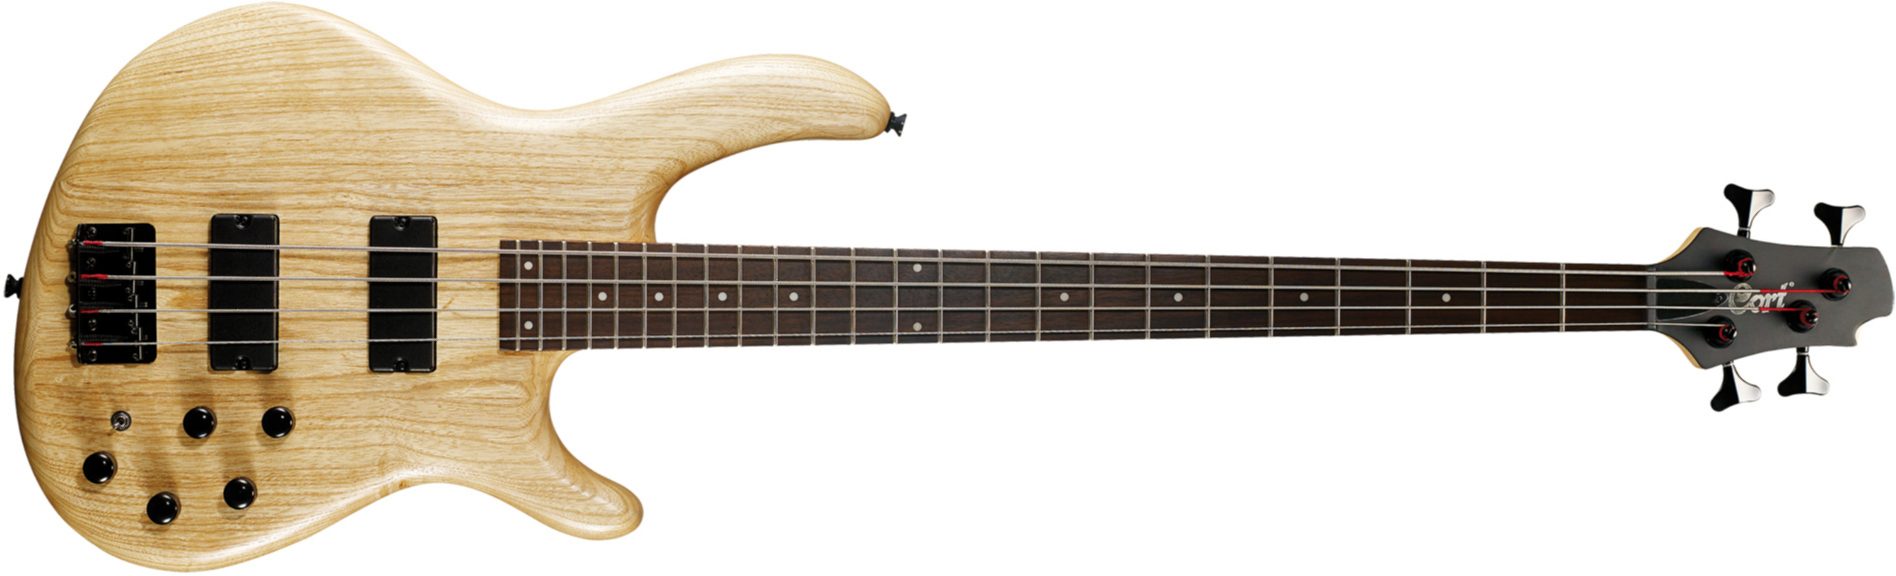 Cort Action Dlx As Opn Ash Rw - Natural Open Pore - Solid body elektrische bas - Main picture